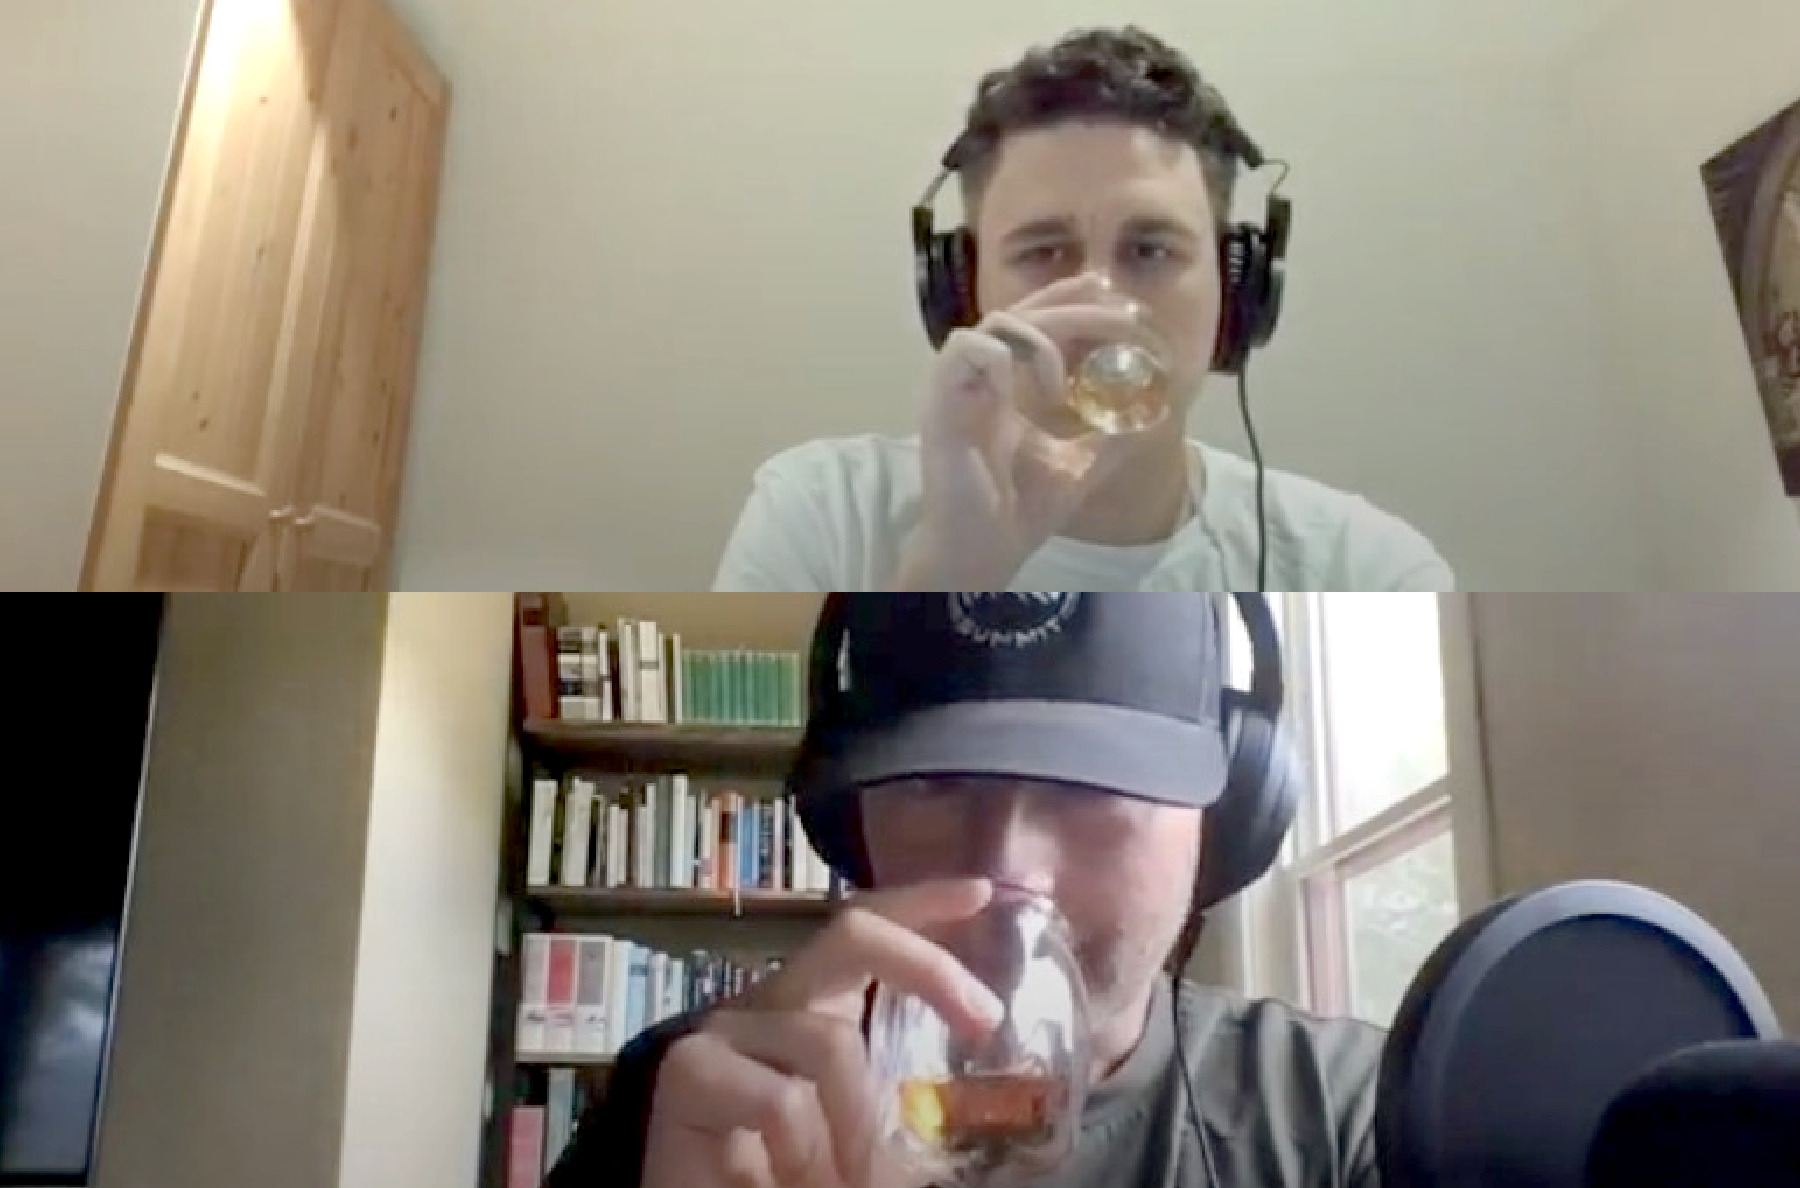 How do you define “consistency” — the ability to produce the exact same thing time & time again, or is it producing a product that is never exactly the same, but is always of high quality? That question is at the heart of this CRAFTED podcast conversation about official offerings vs independent bottlings, but Matt and Jonathan also find time to talk about Scotch and spit buckets; Matt’s current top-3 ‘hottest’ Scotch brands; the short lifespans of humans vs the long lifespans of craft categories; upcoming ski trips to Japan (Blister members, listen up); and more.